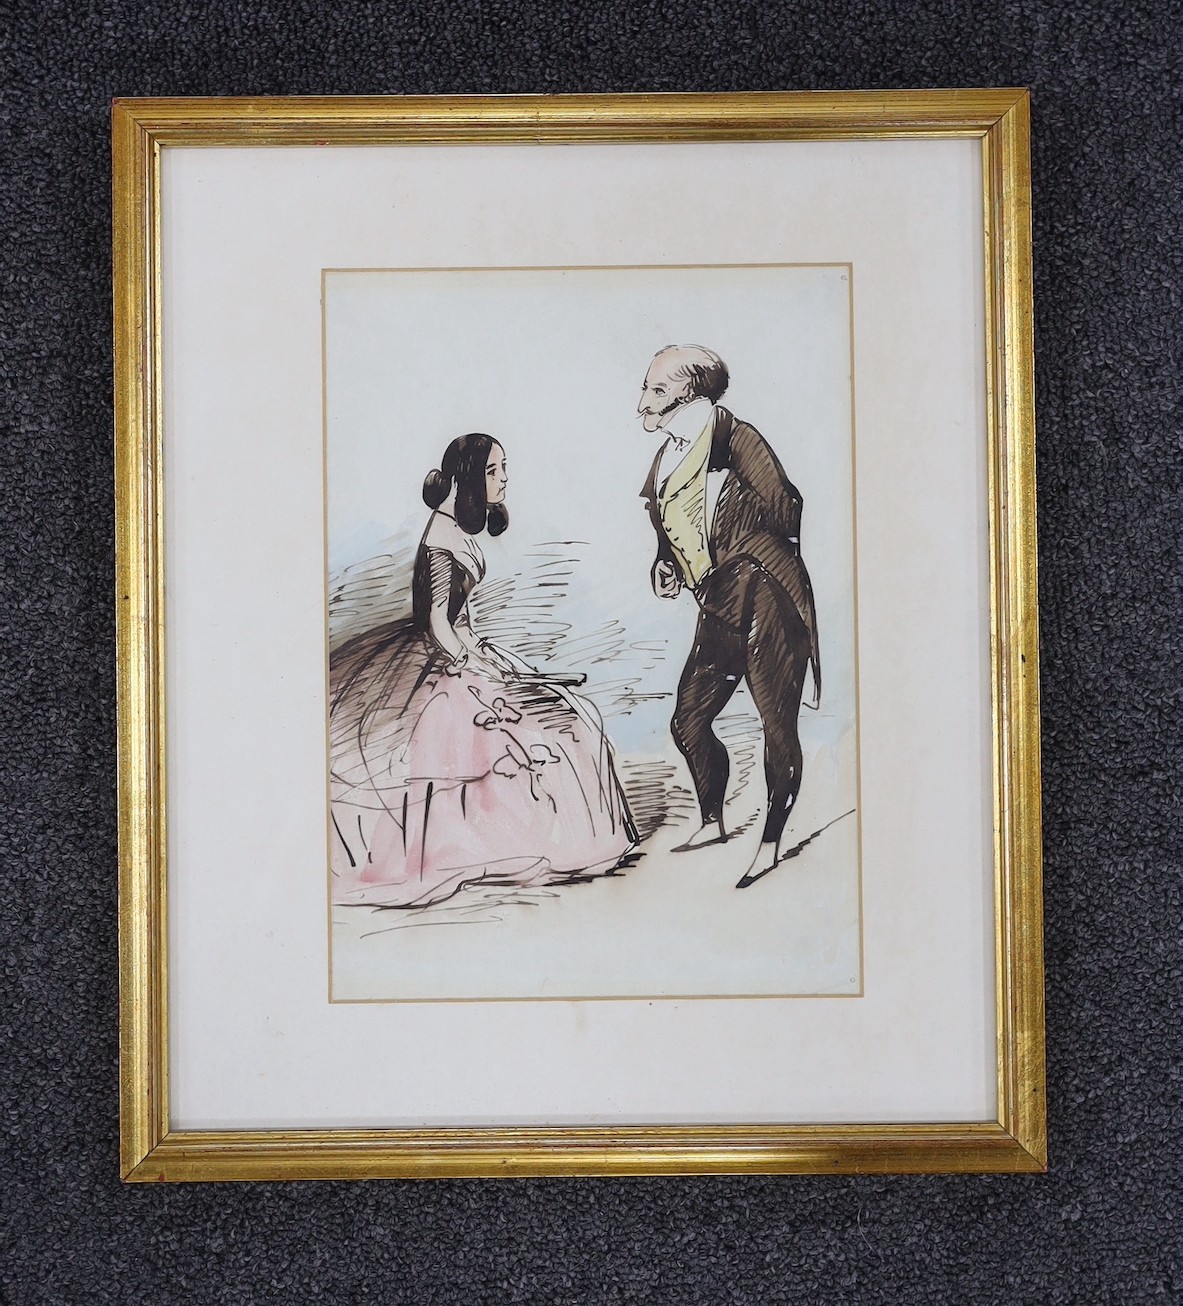 Constantin Guys (1802-1892), pen, ink and watercolour, ' A fashionable couple', 23 x 17cm.